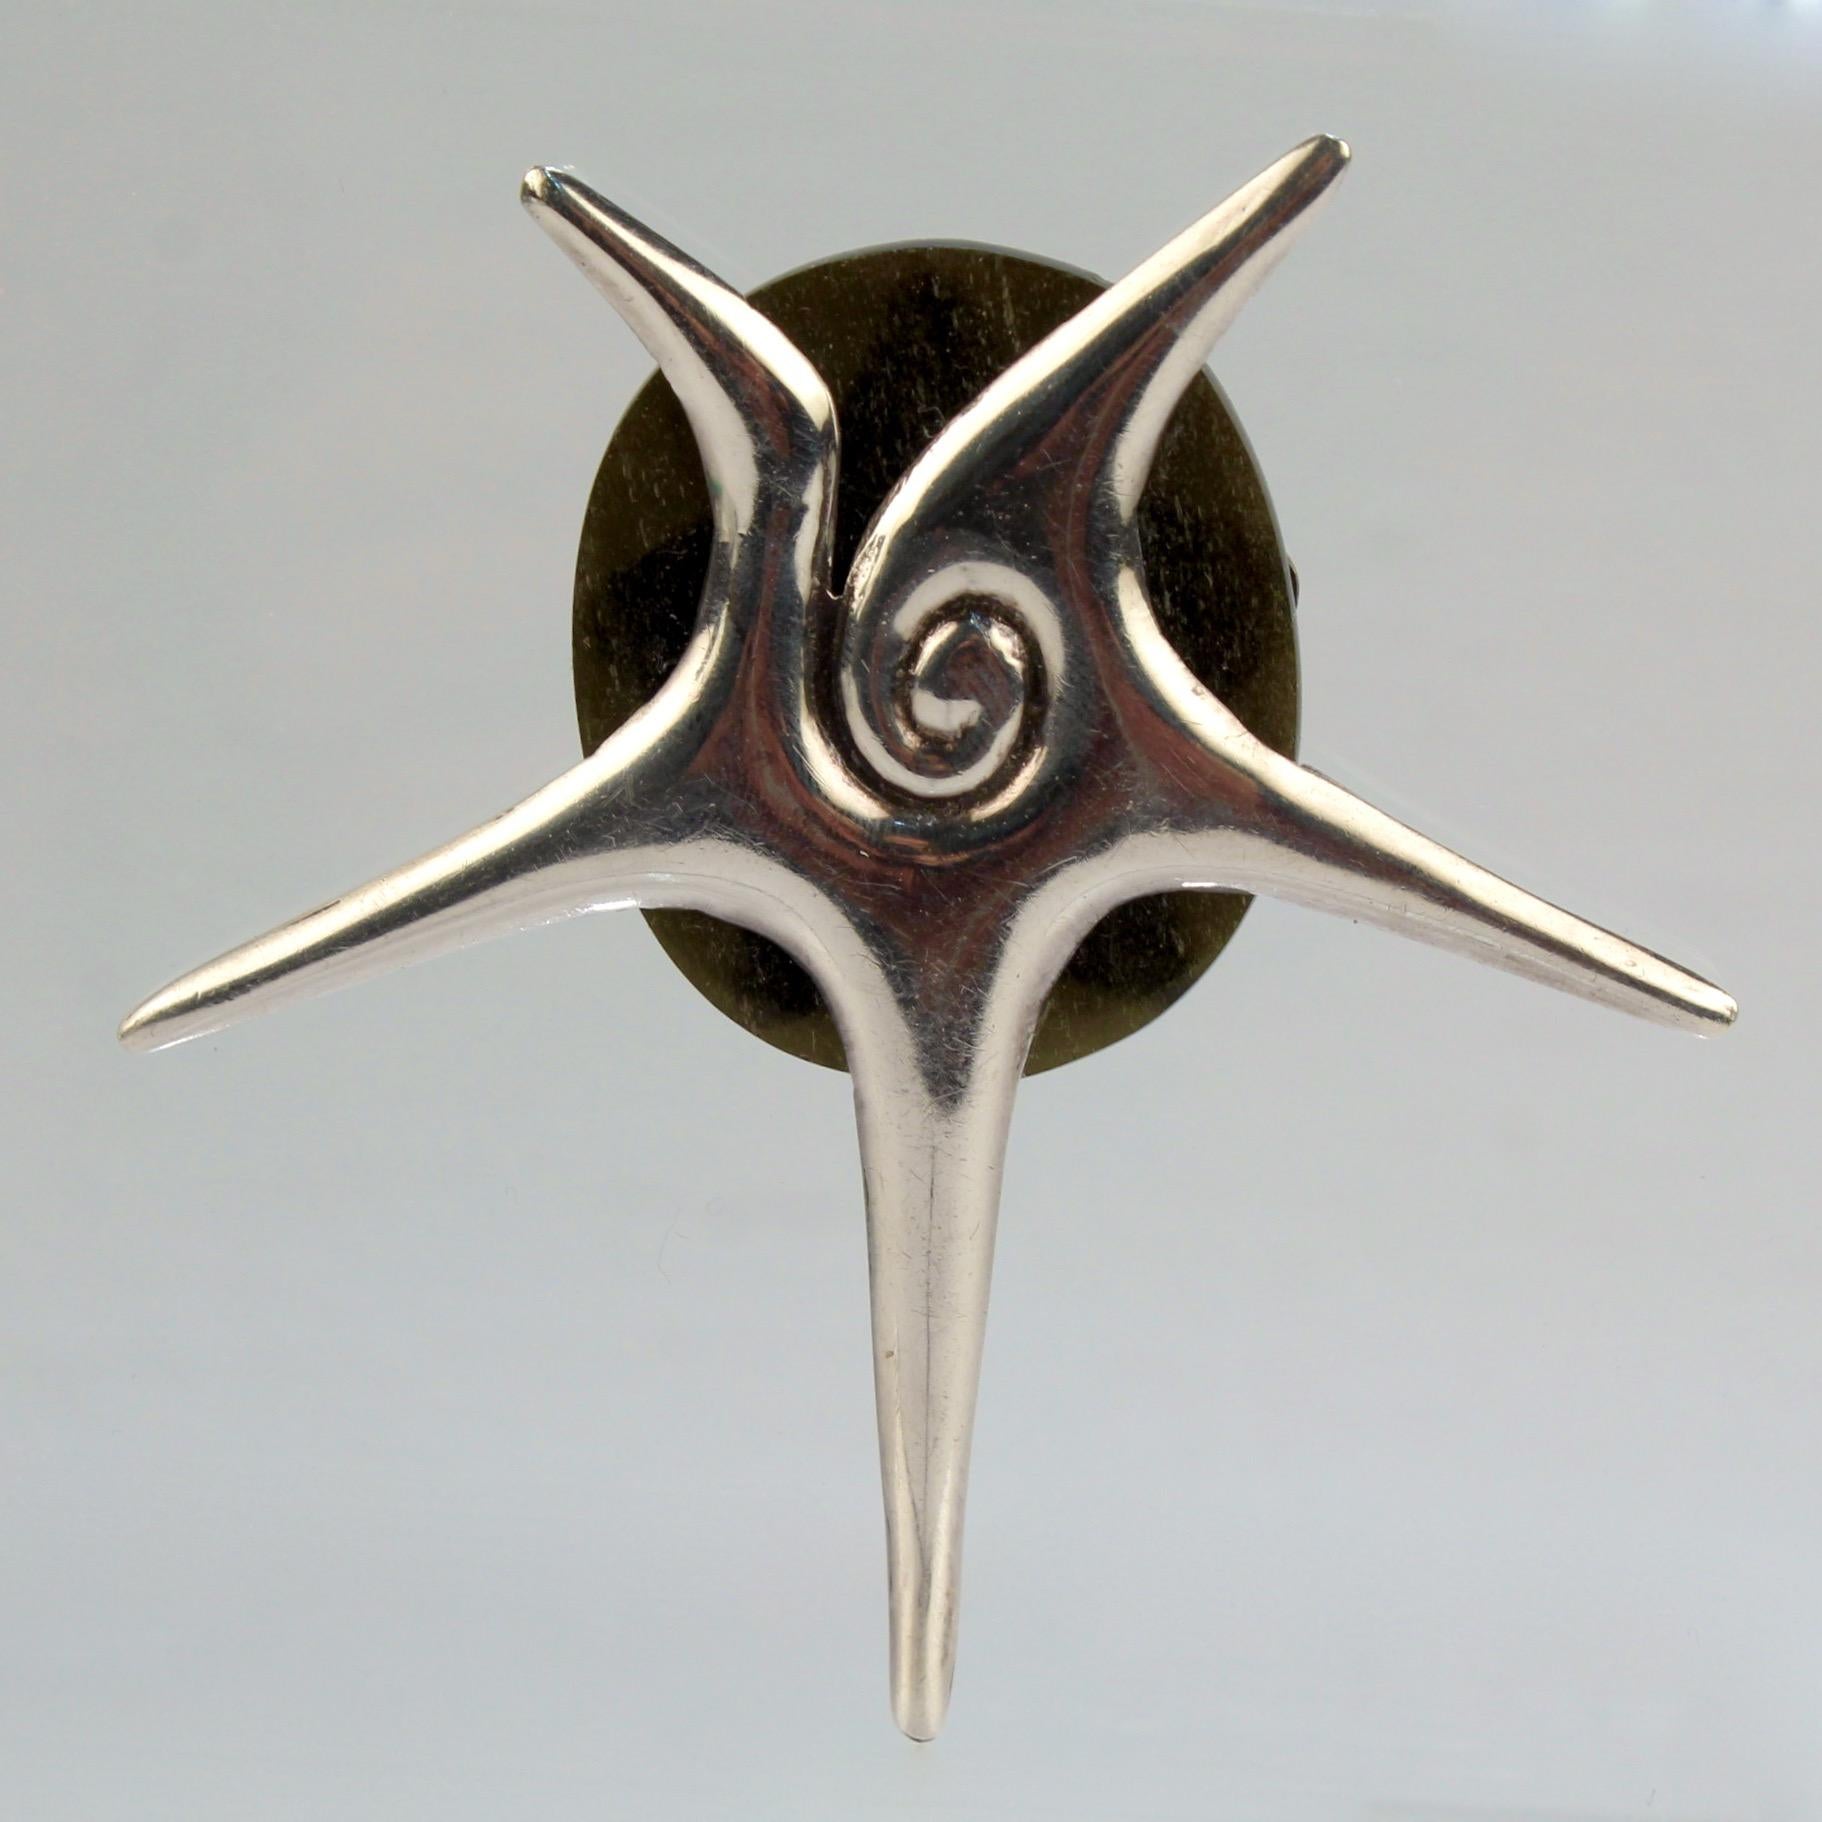 A fine William Spratling brooch or pin.

In the shape of a stylized conch shell supported by a dark green disc.

Comprised of sterling silver and a smooth polished dark green gemstone (that we believe to be aventurine quartzite.)

Simply compelling